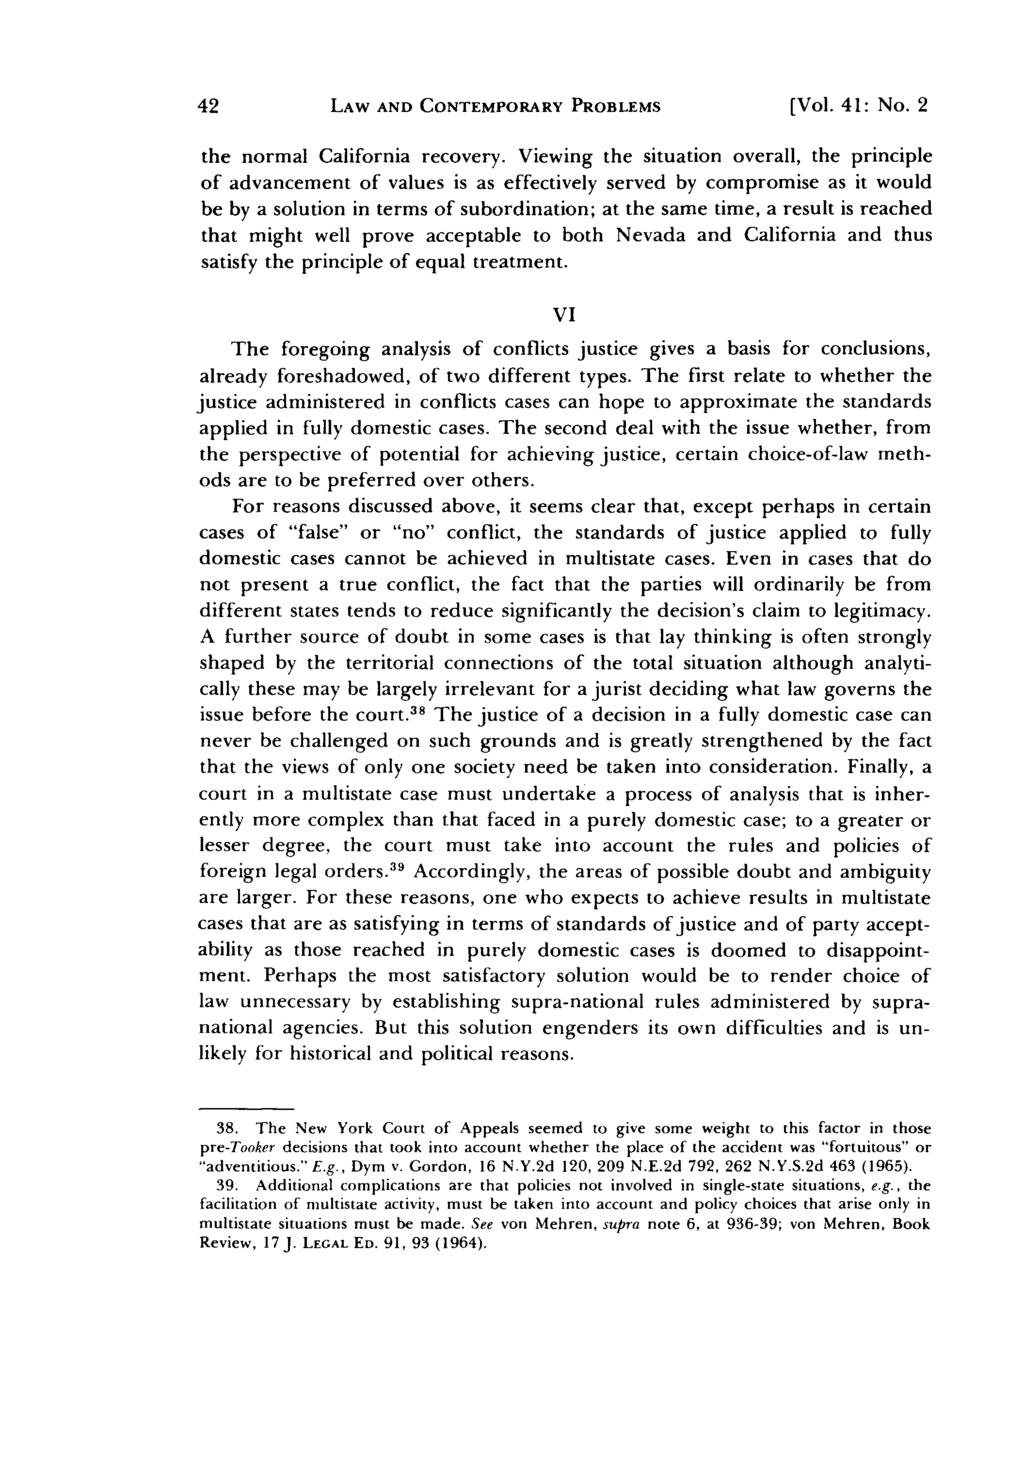 LAW AND CONTEMPORARY PROBLEMS [Vol. 4 1: No. 2 the normal California recovery.